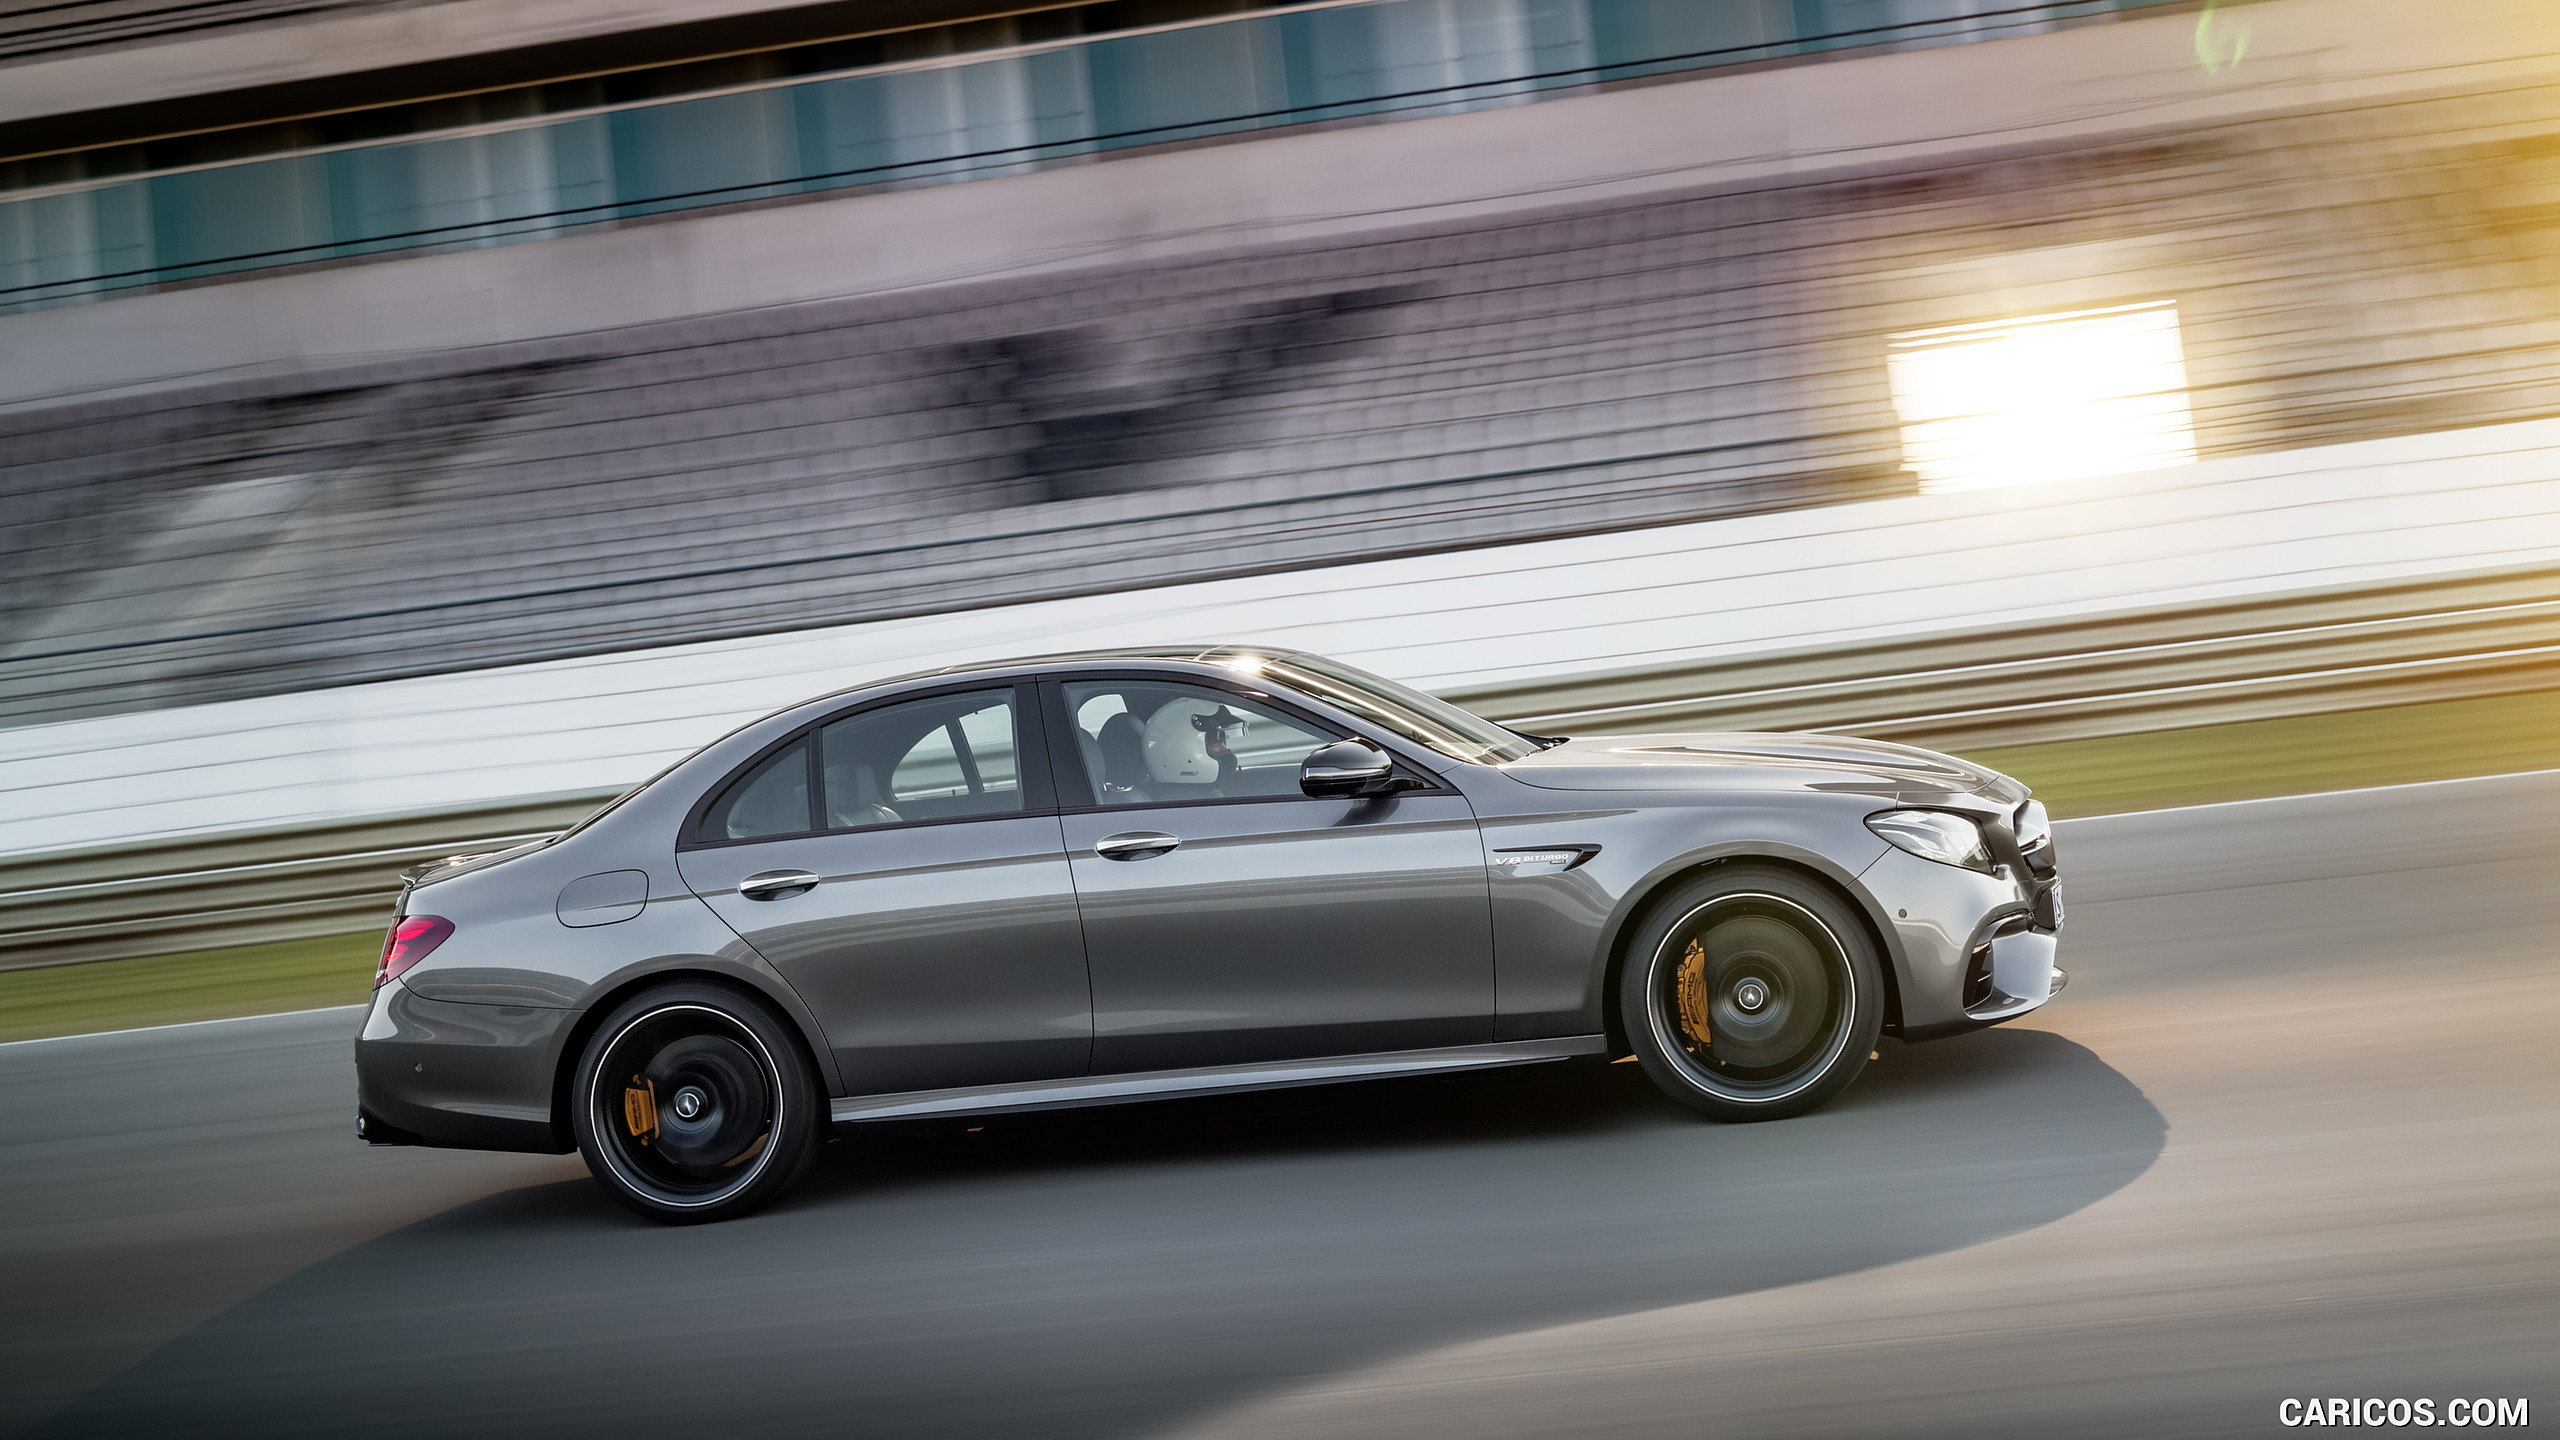 2018 Mercedes-AMG E63 S 4MATIC+ - Side, #18 of 323